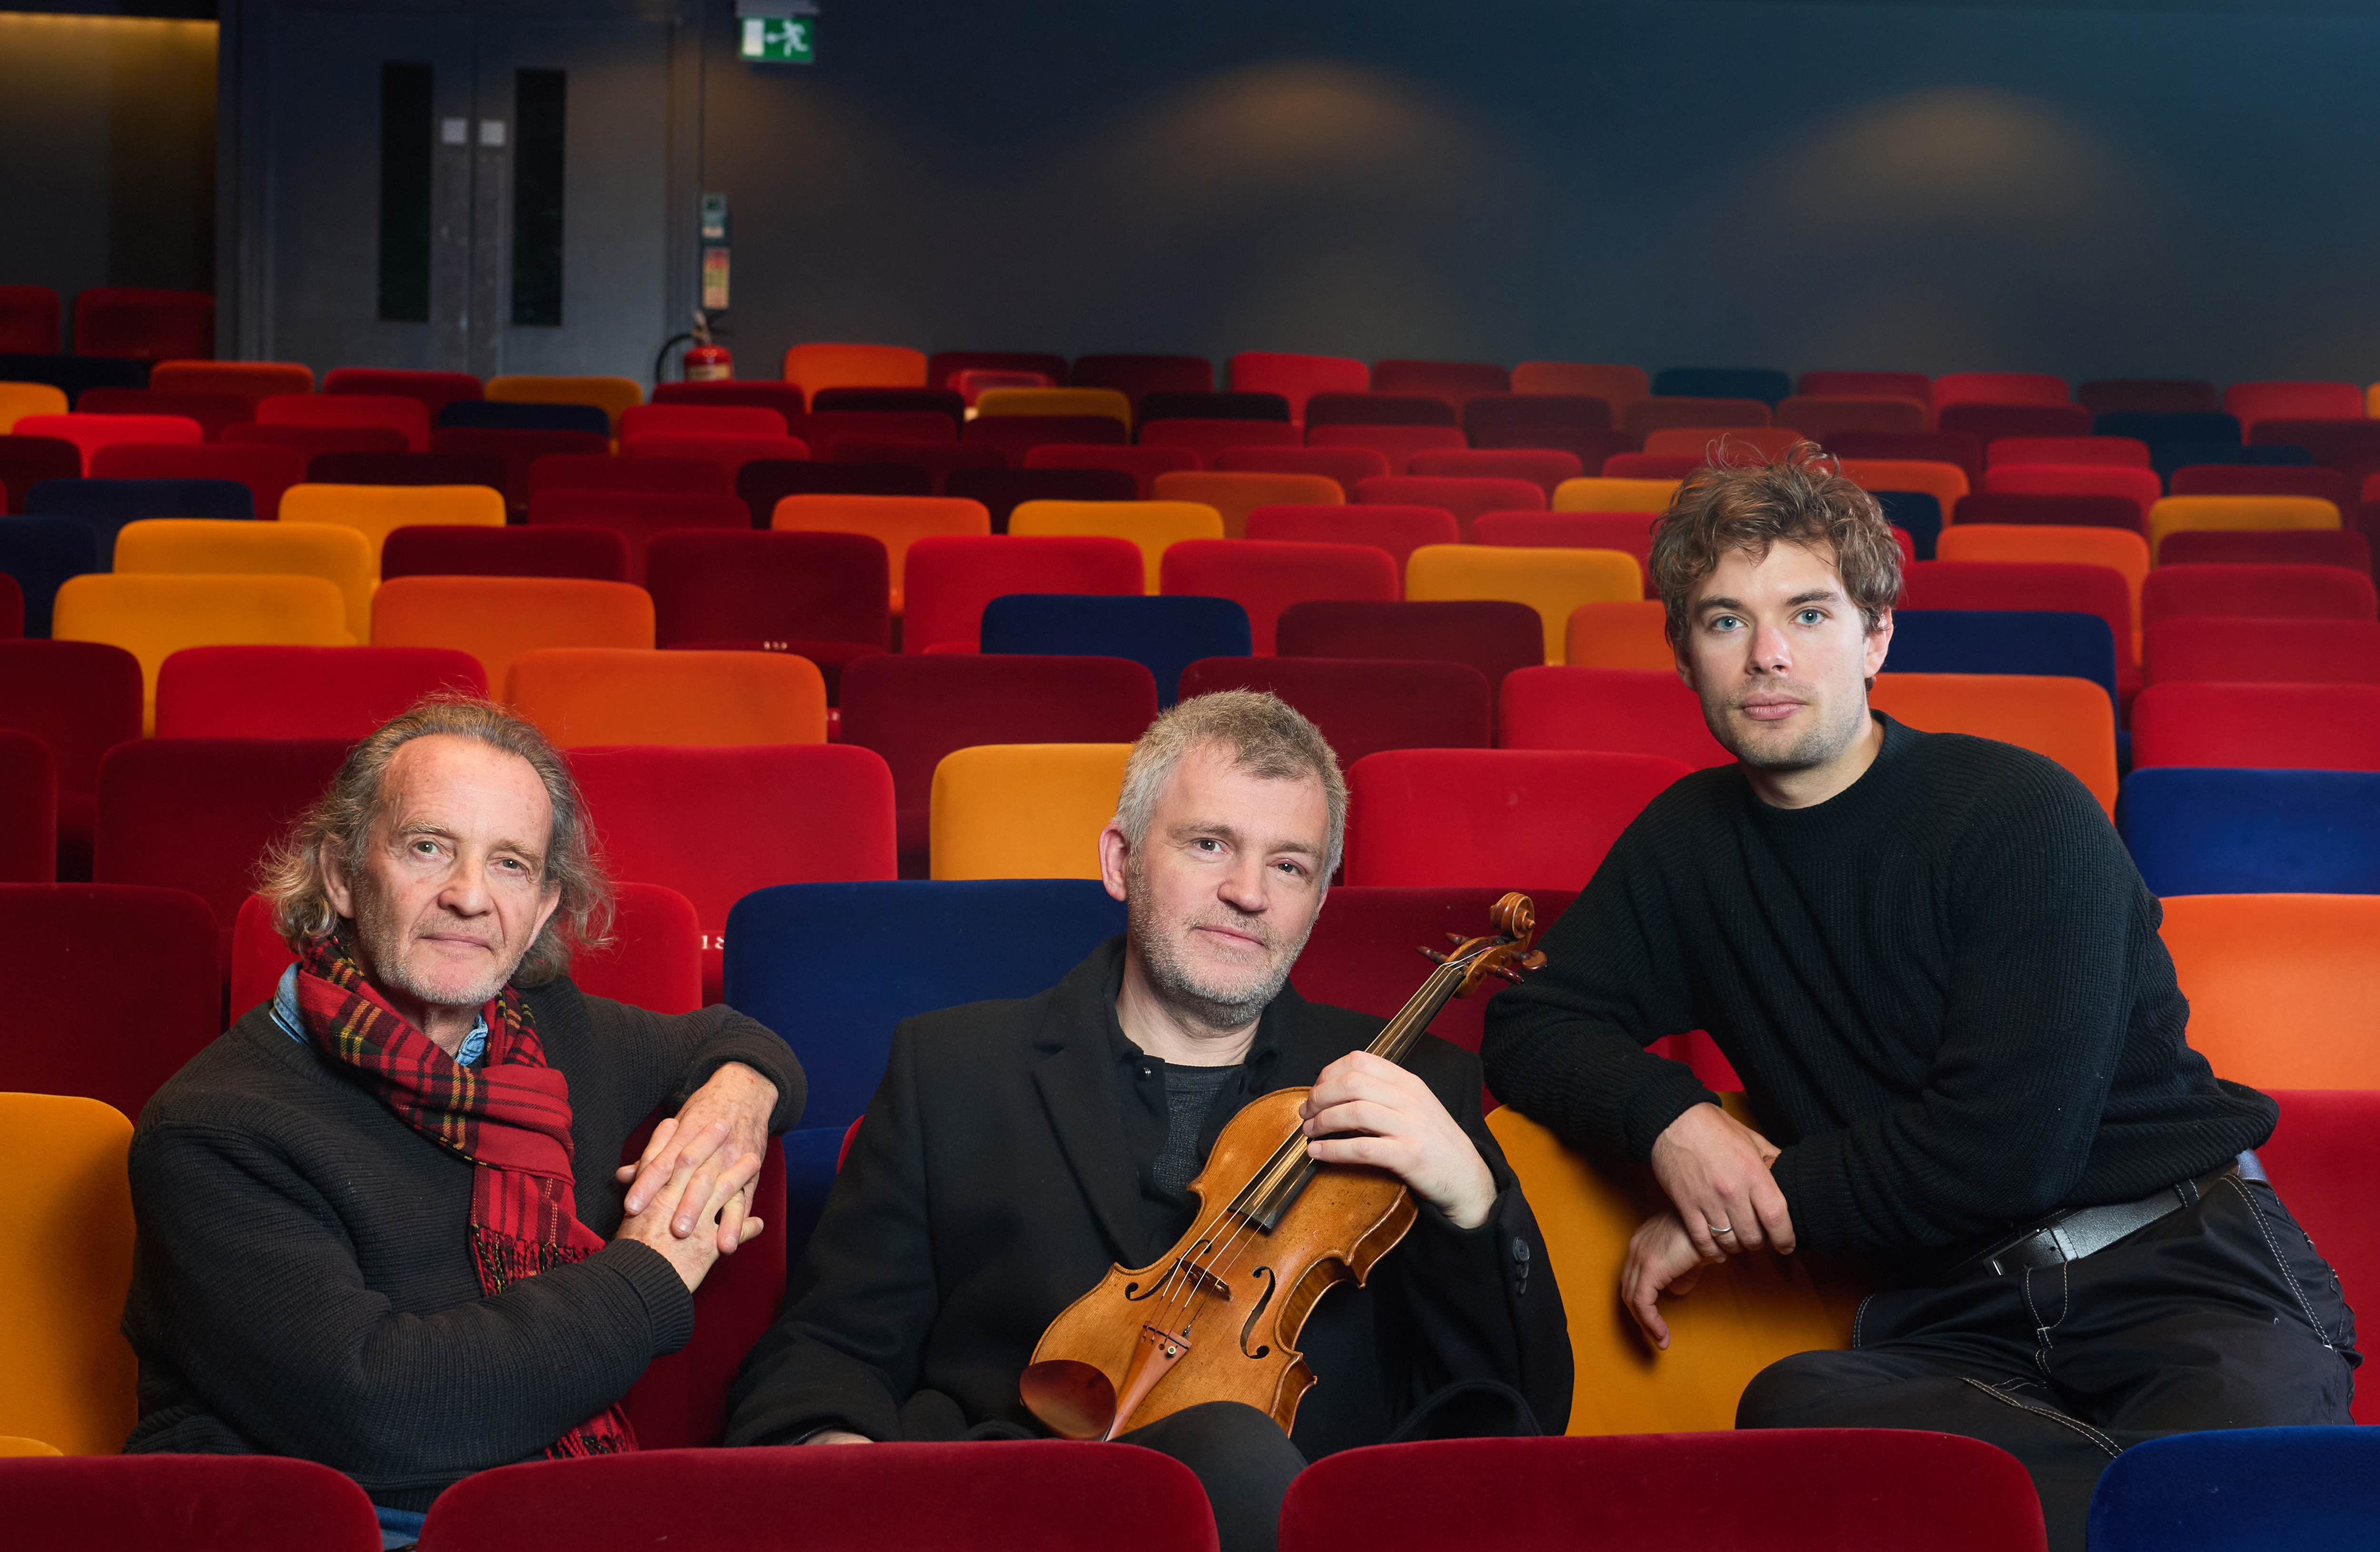 Anton Lesser, David Le Page and Charlie Hamblett sat in the Oxford Playhouse auditorium. David sits in the middle of the two actors holding a violin.